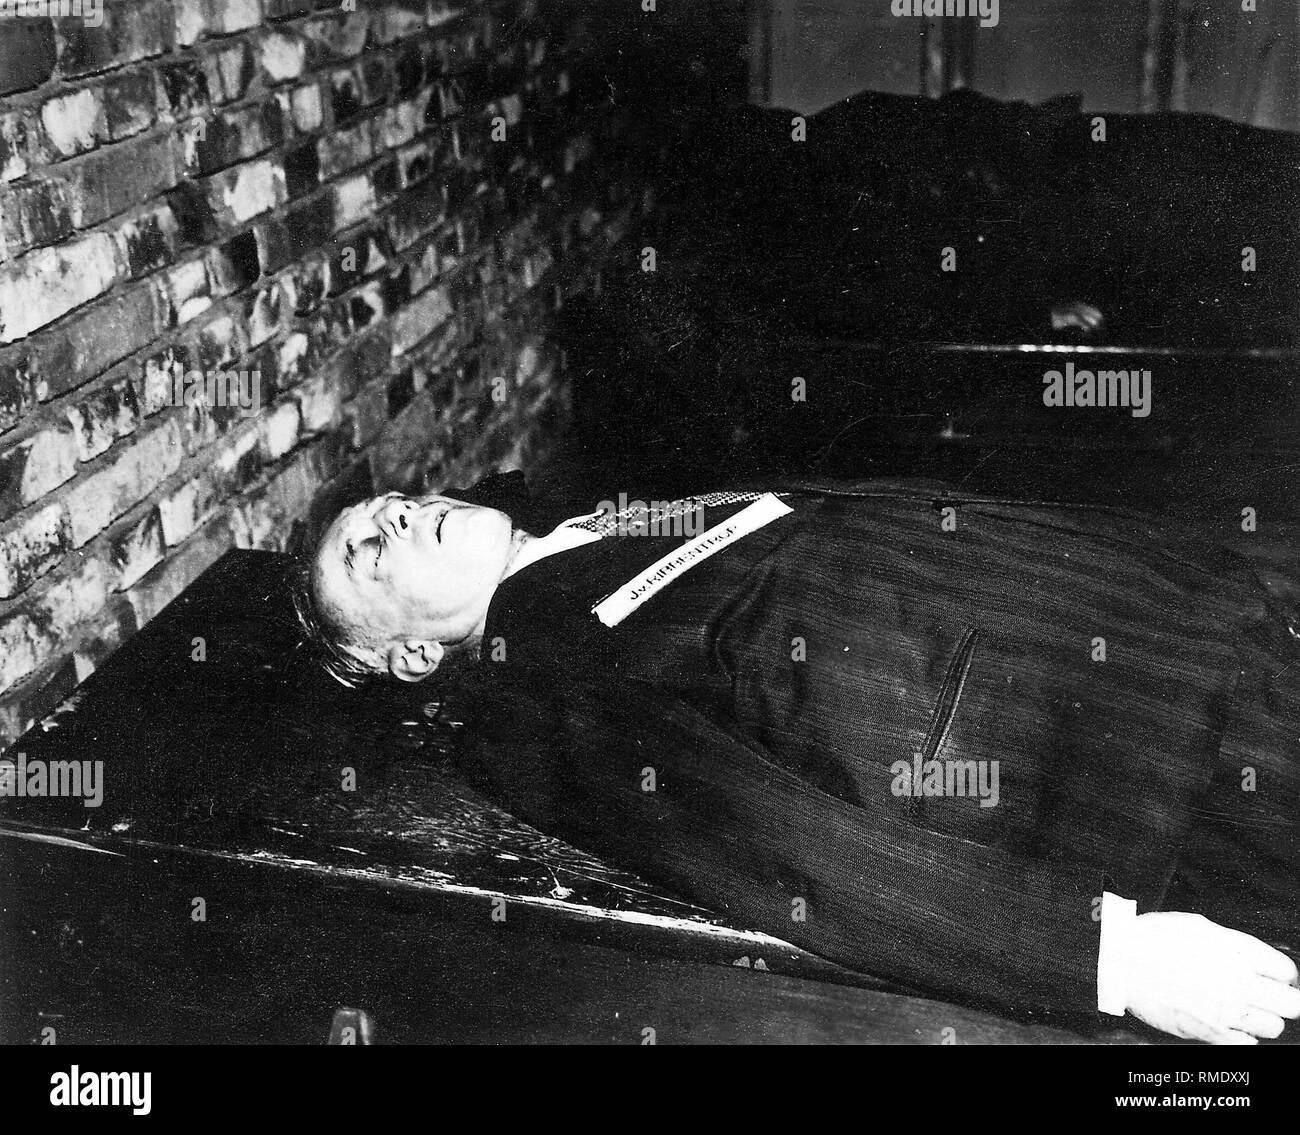 Reich Foreign Minister Joachim von Ribbentrop after his execution by hanging on October 16, 1946 in Nuremberg (Nuremberg Trials). Stock Photo